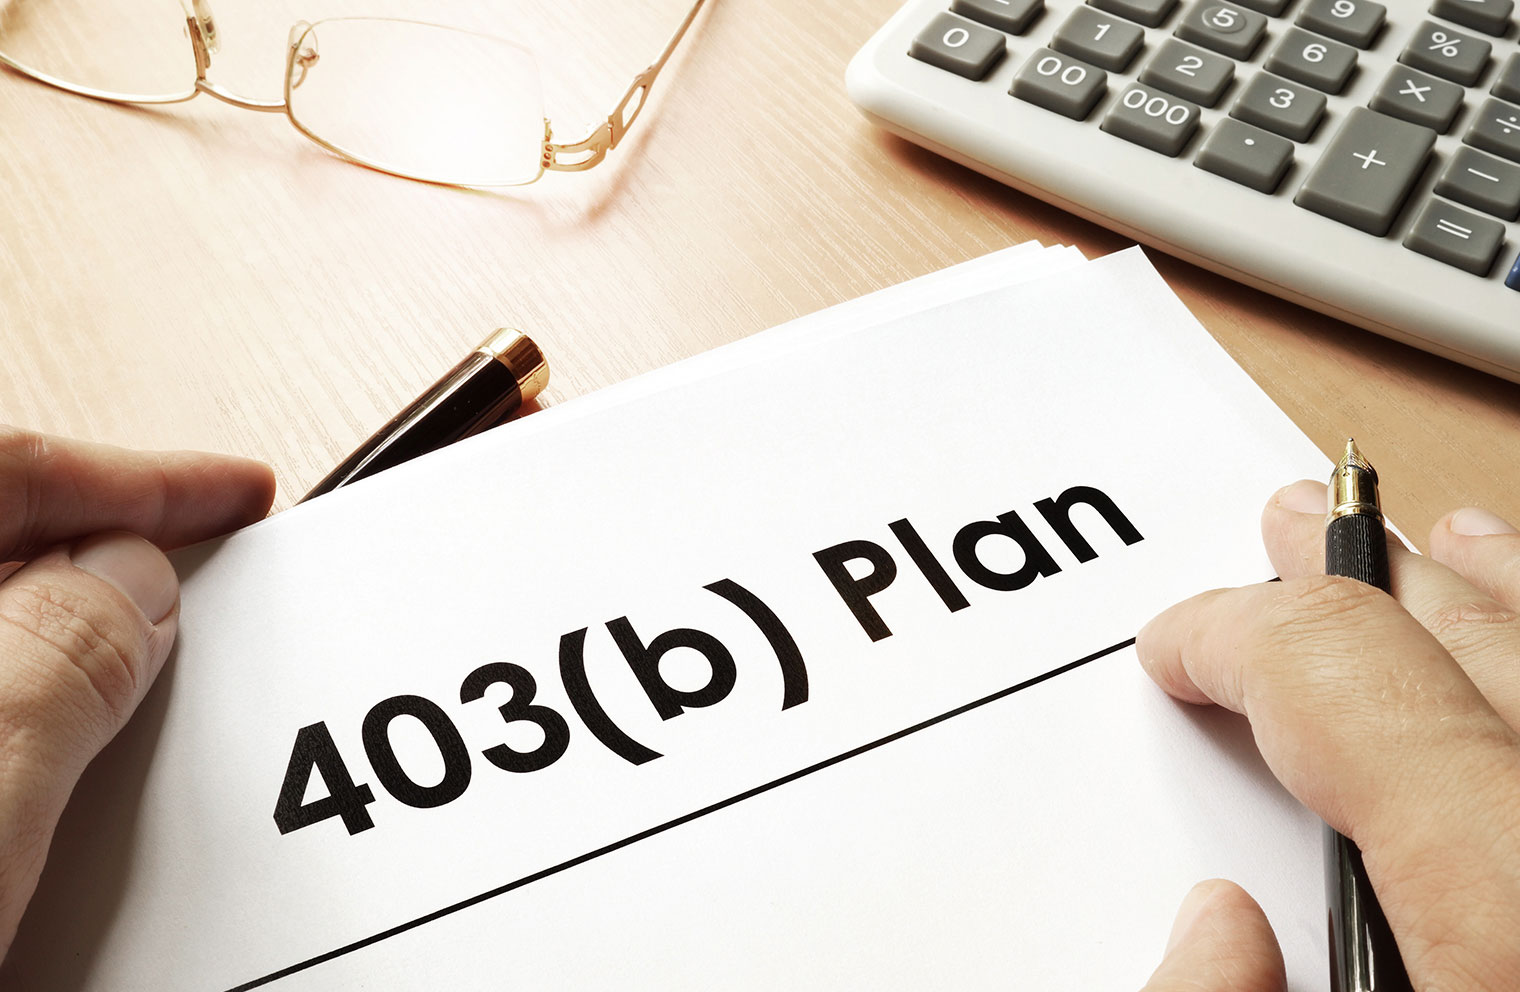 Image of 403(b) Plan written on paper at desk with calculator.